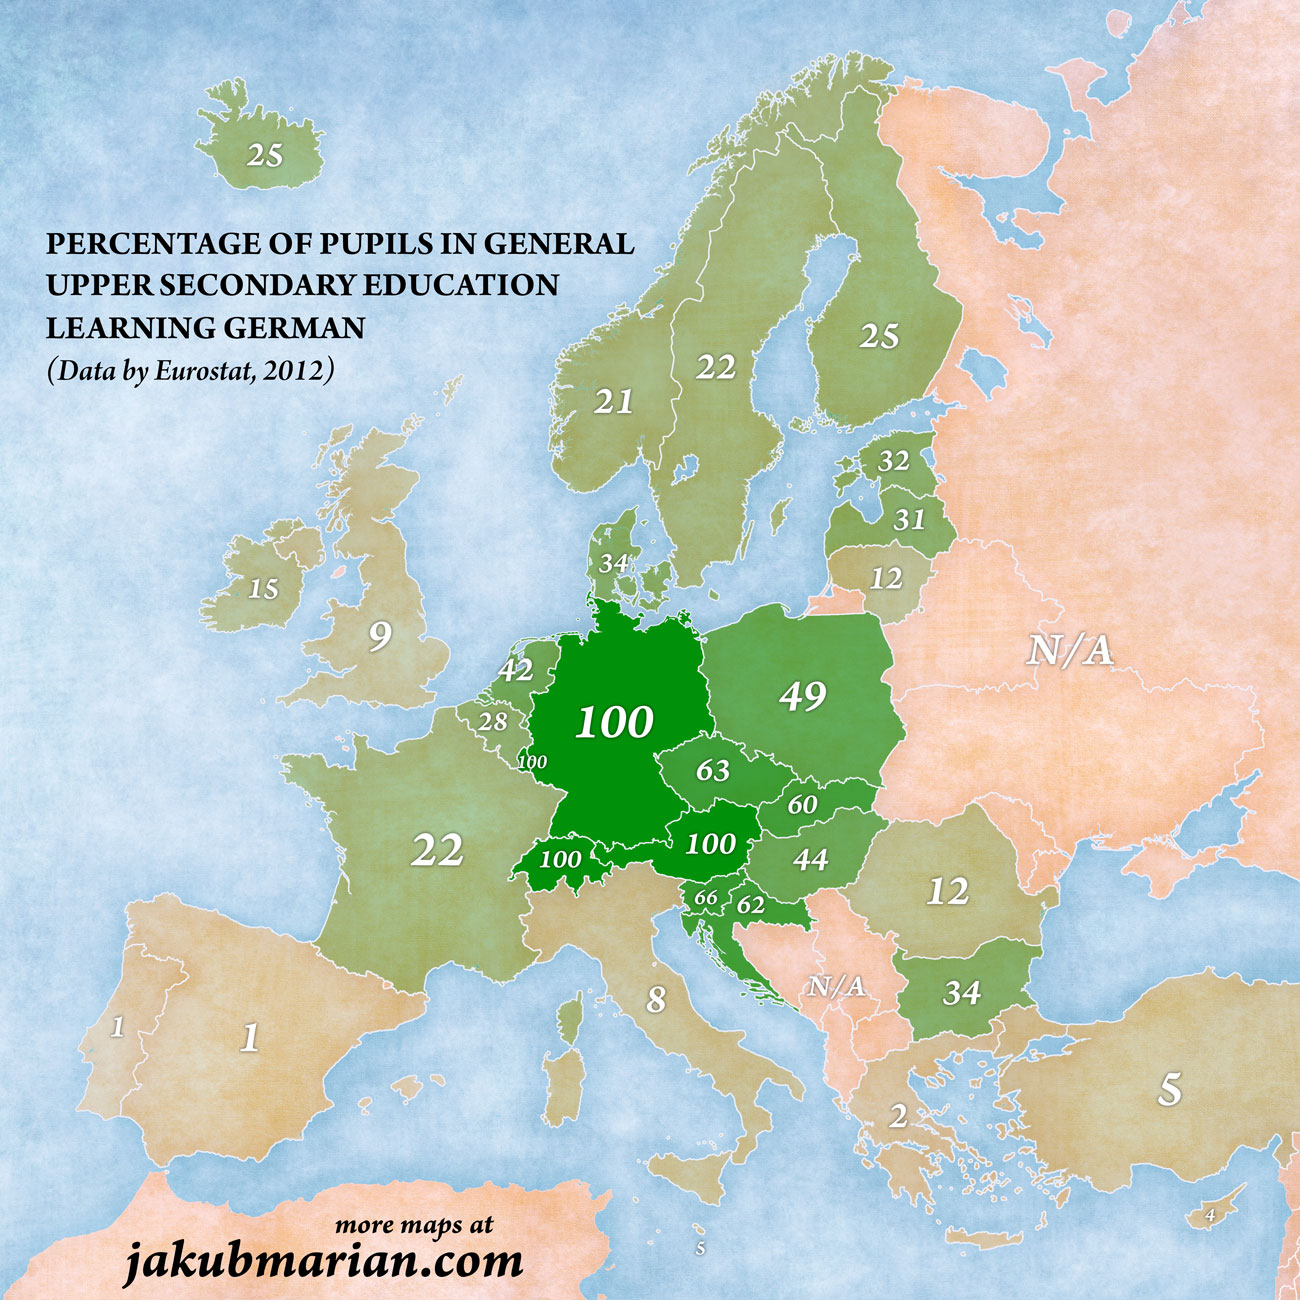 Percentages of pupils learning German in Europe